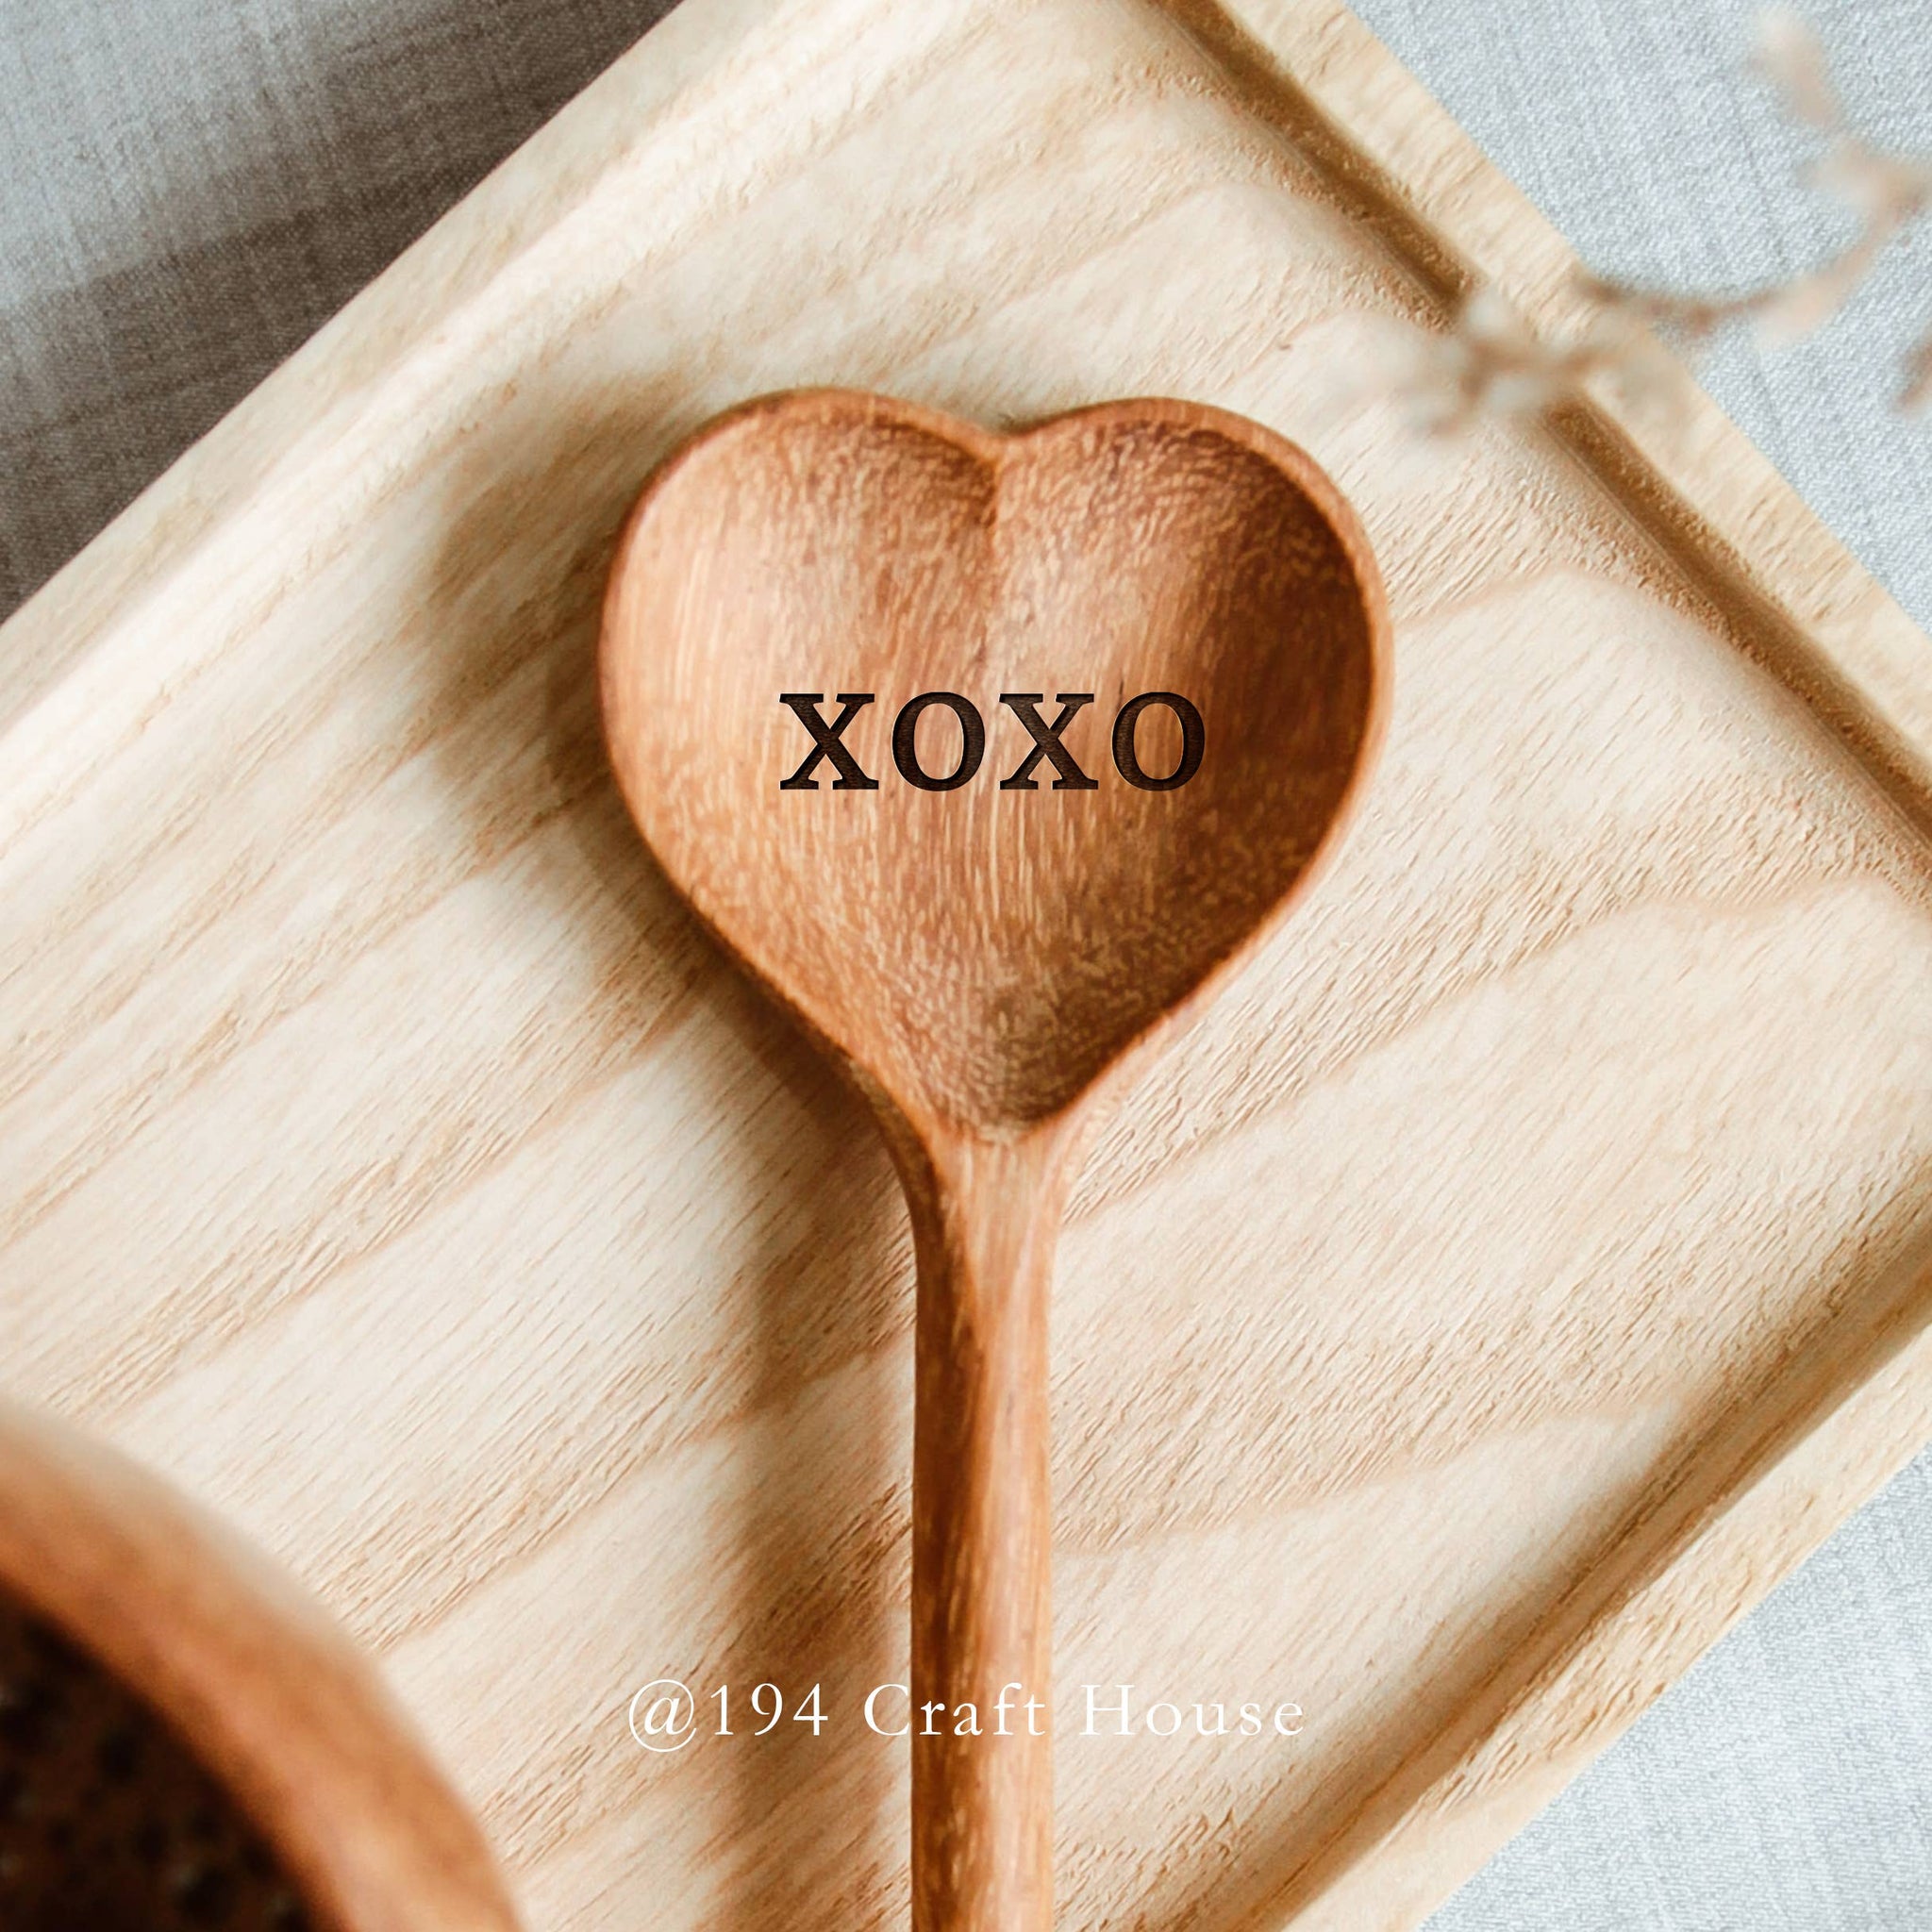 XOXO Engraved Wooden Heart Spoon - Gifts & Home Decor